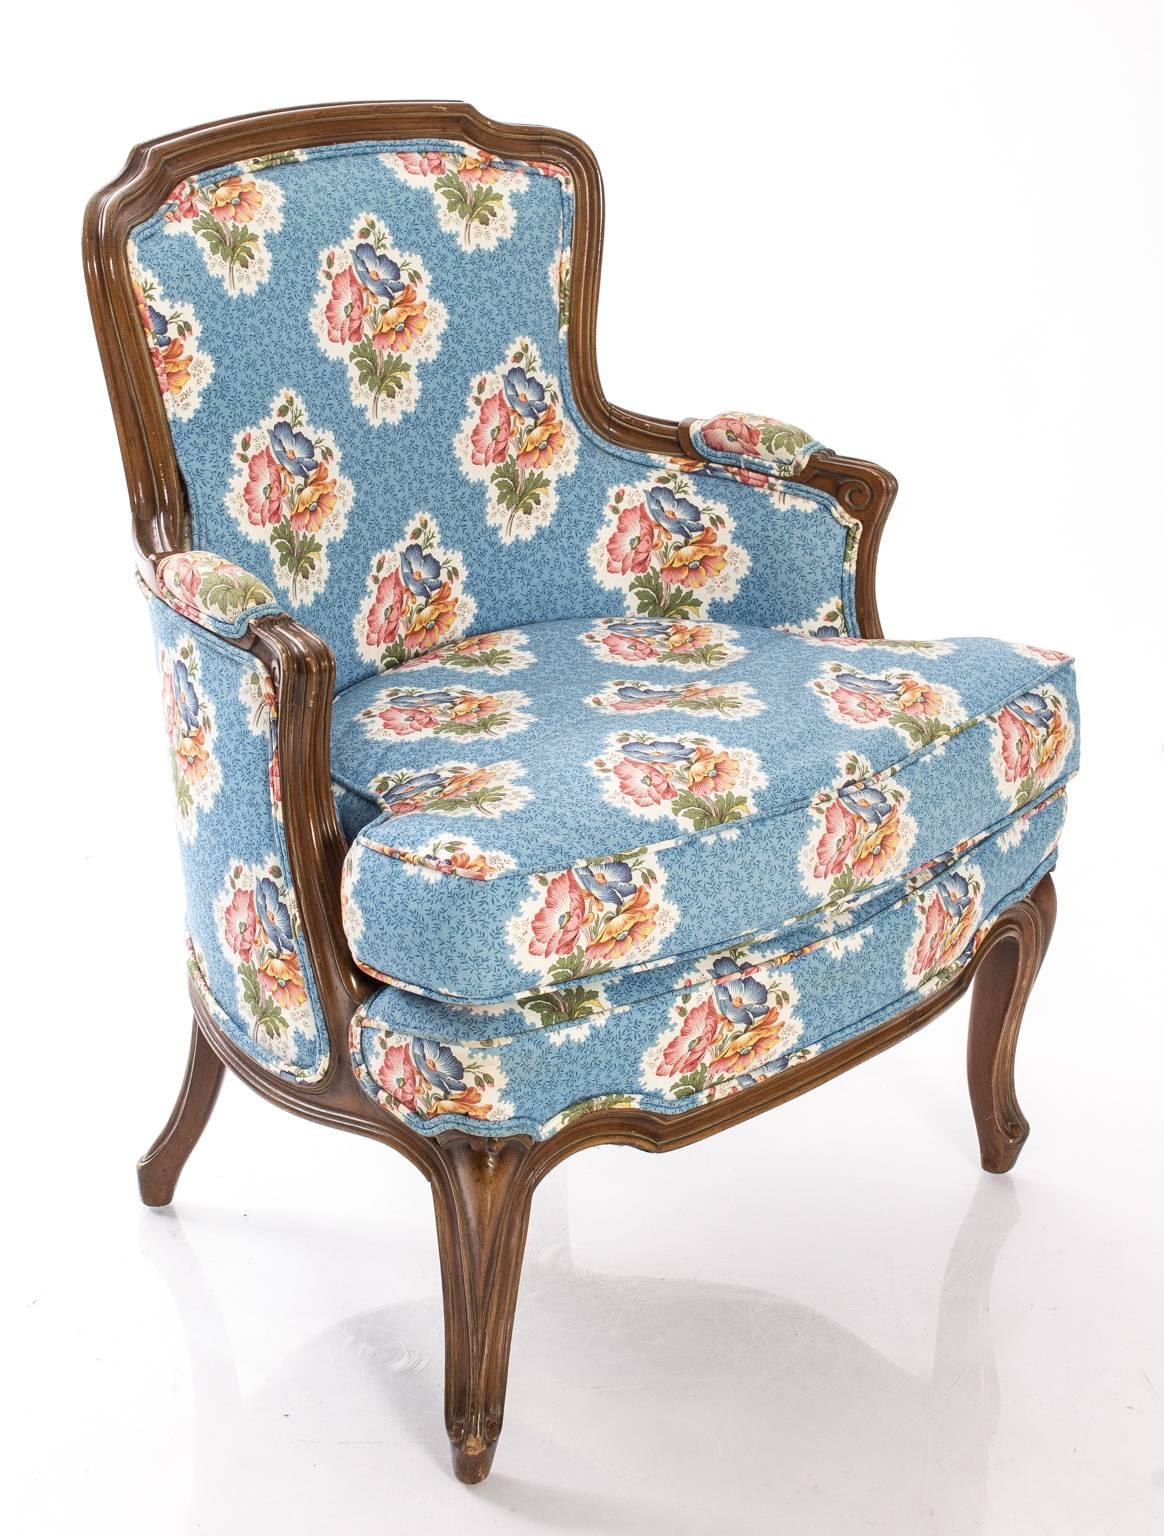 Petite bergère chair upholstered in Brunschwig fabric.